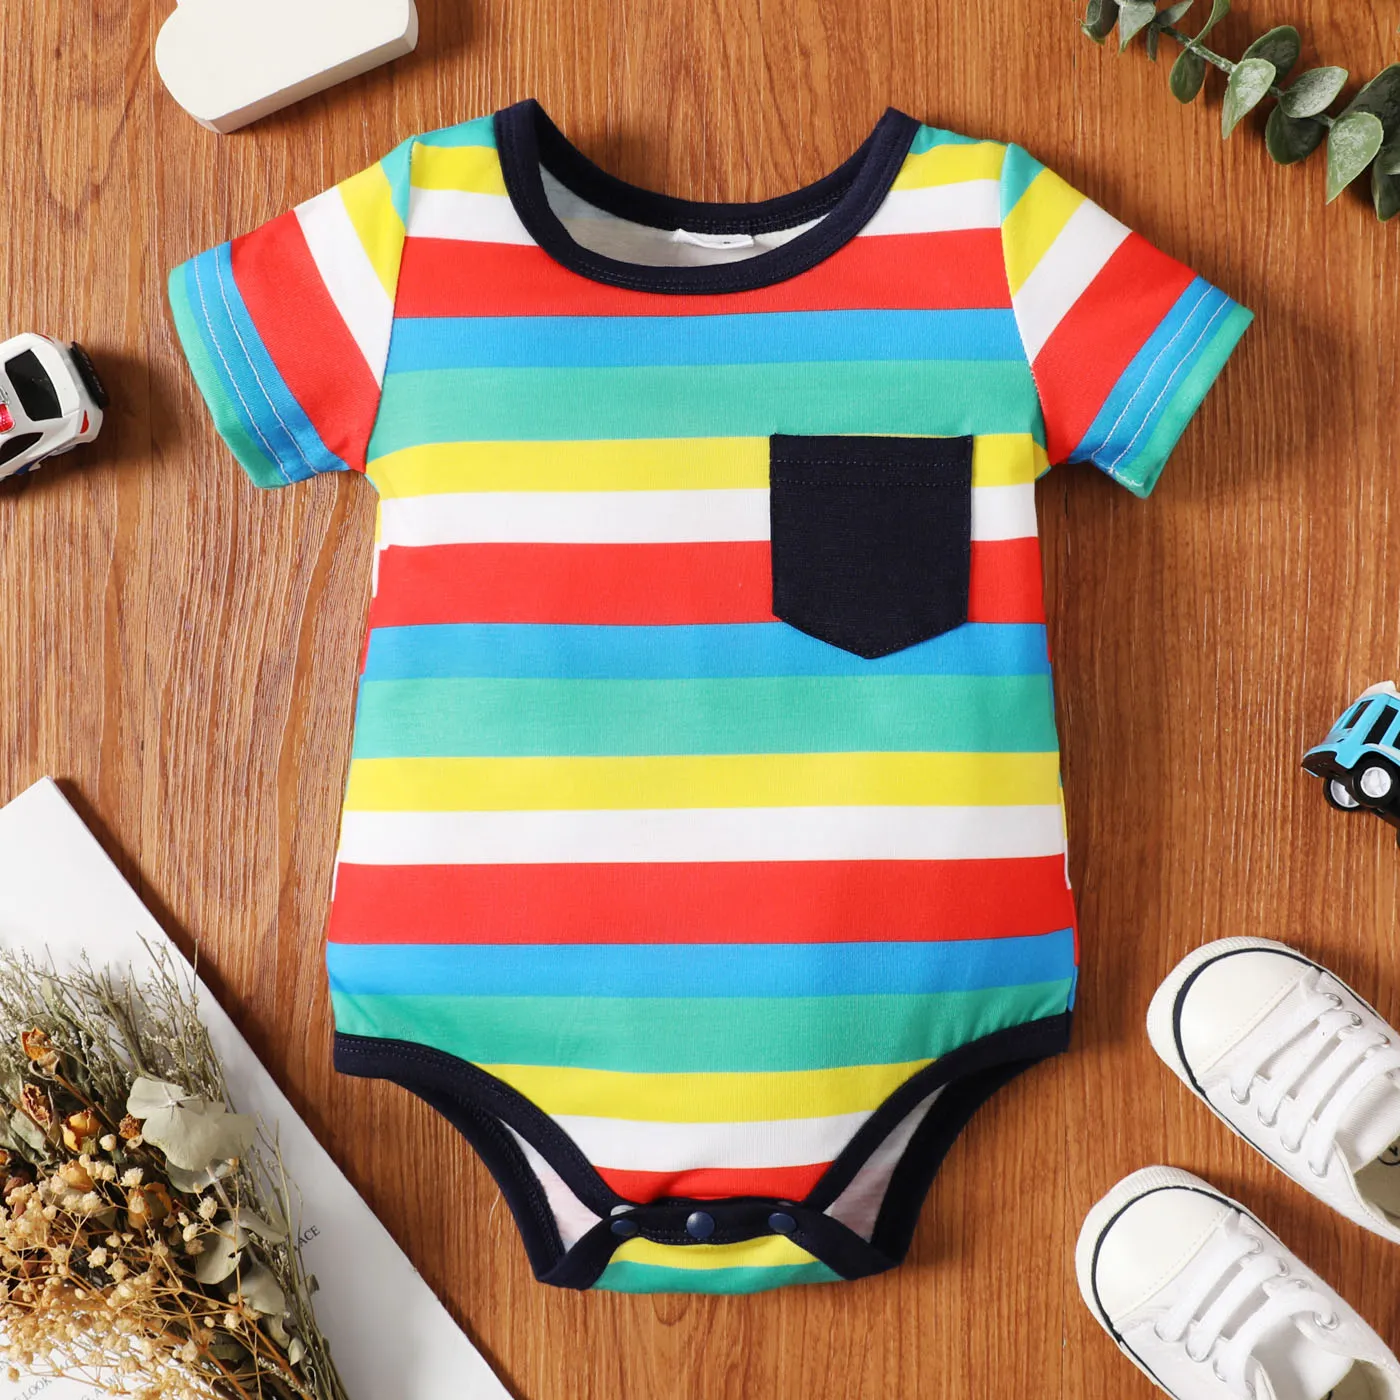 Naiatm Baby Boy Colorful Striped or Vehicle Print Short-sleeve Romper